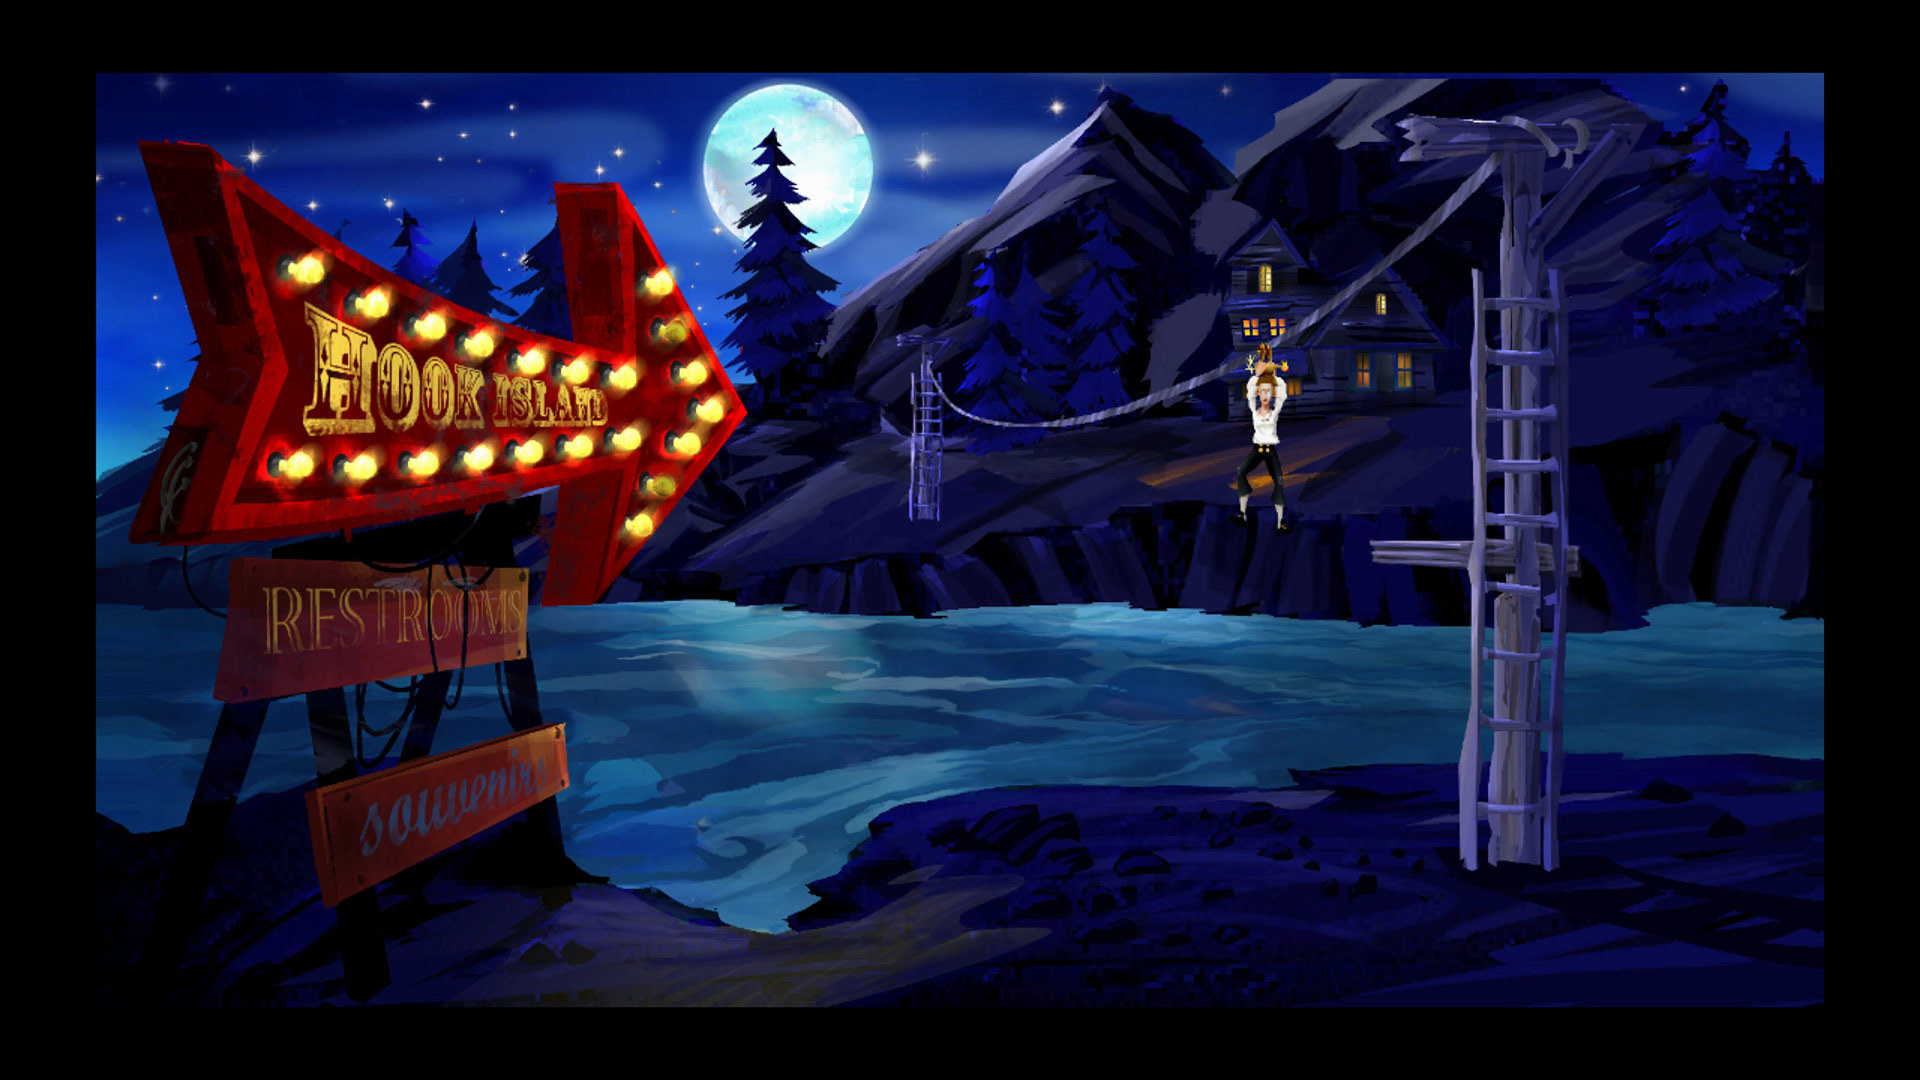 return to monkey island review download free